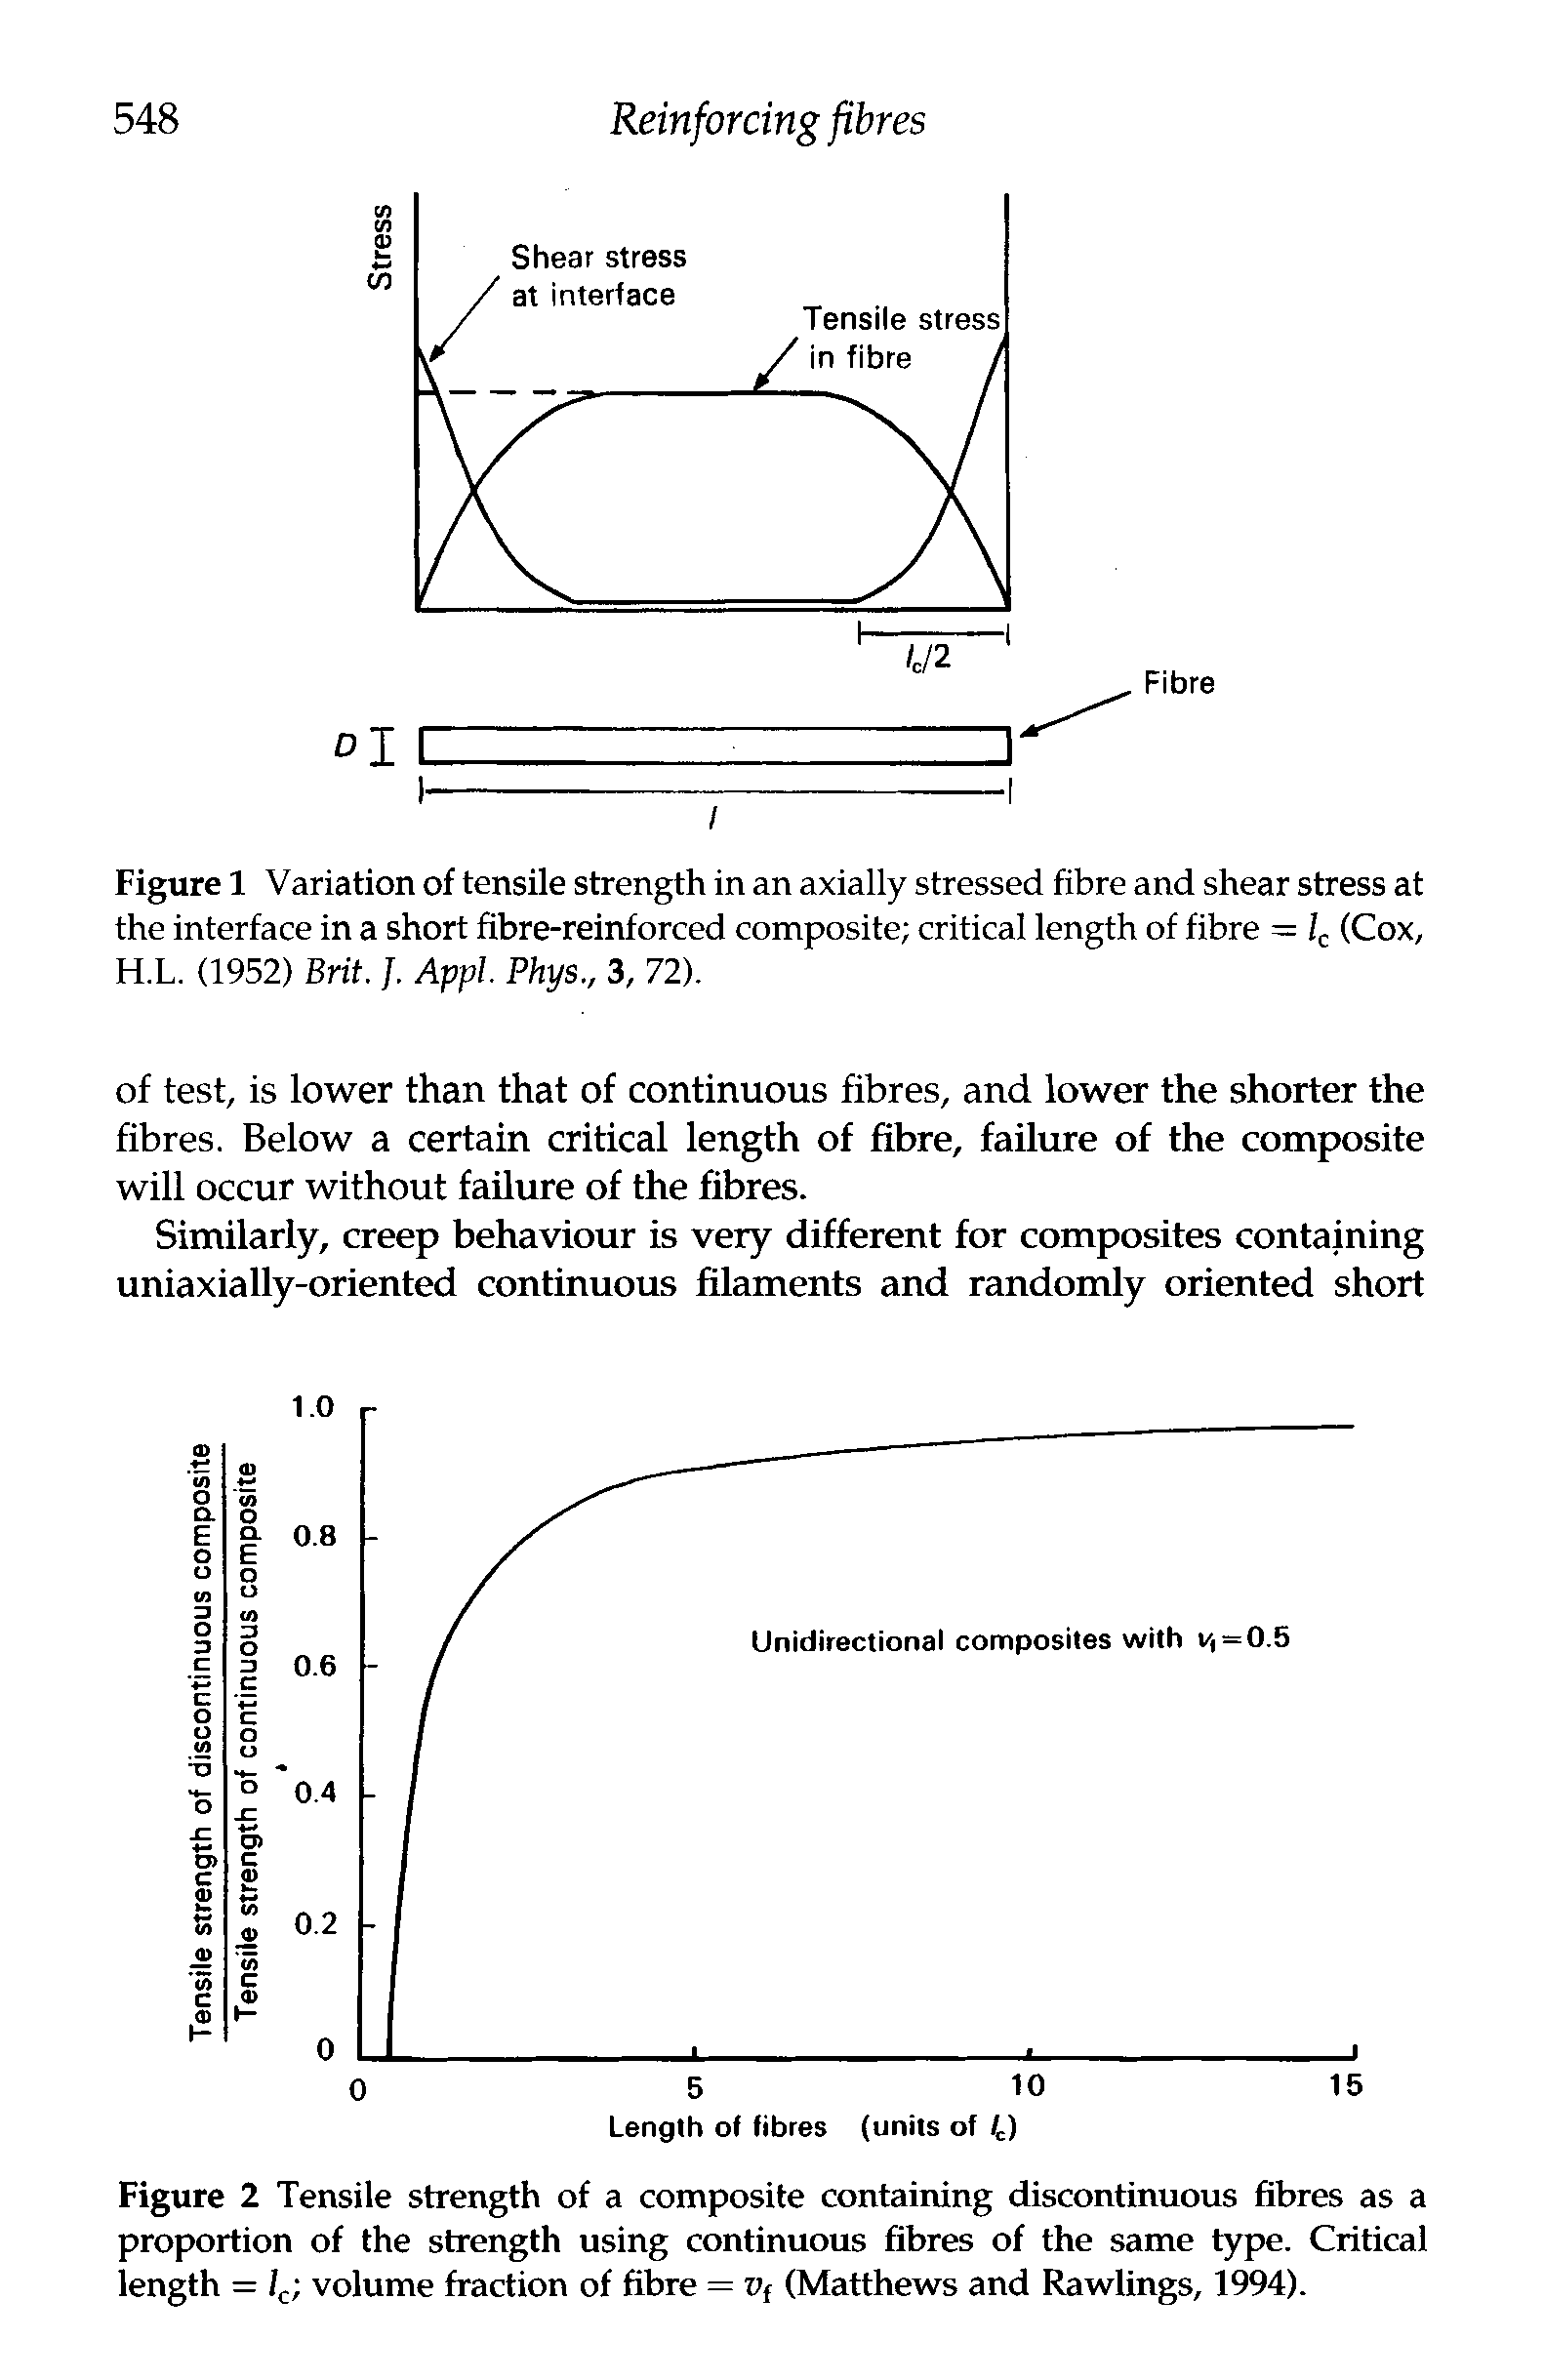 Figure 1 Variation of tensile strength in an axially stressed fibre and shear stress at the interface in a short fibre-reinforced composite critical length of fibre = Z,. (Cox, H.L. (1952) Brit. J. Appl. Phys., 3, 72).